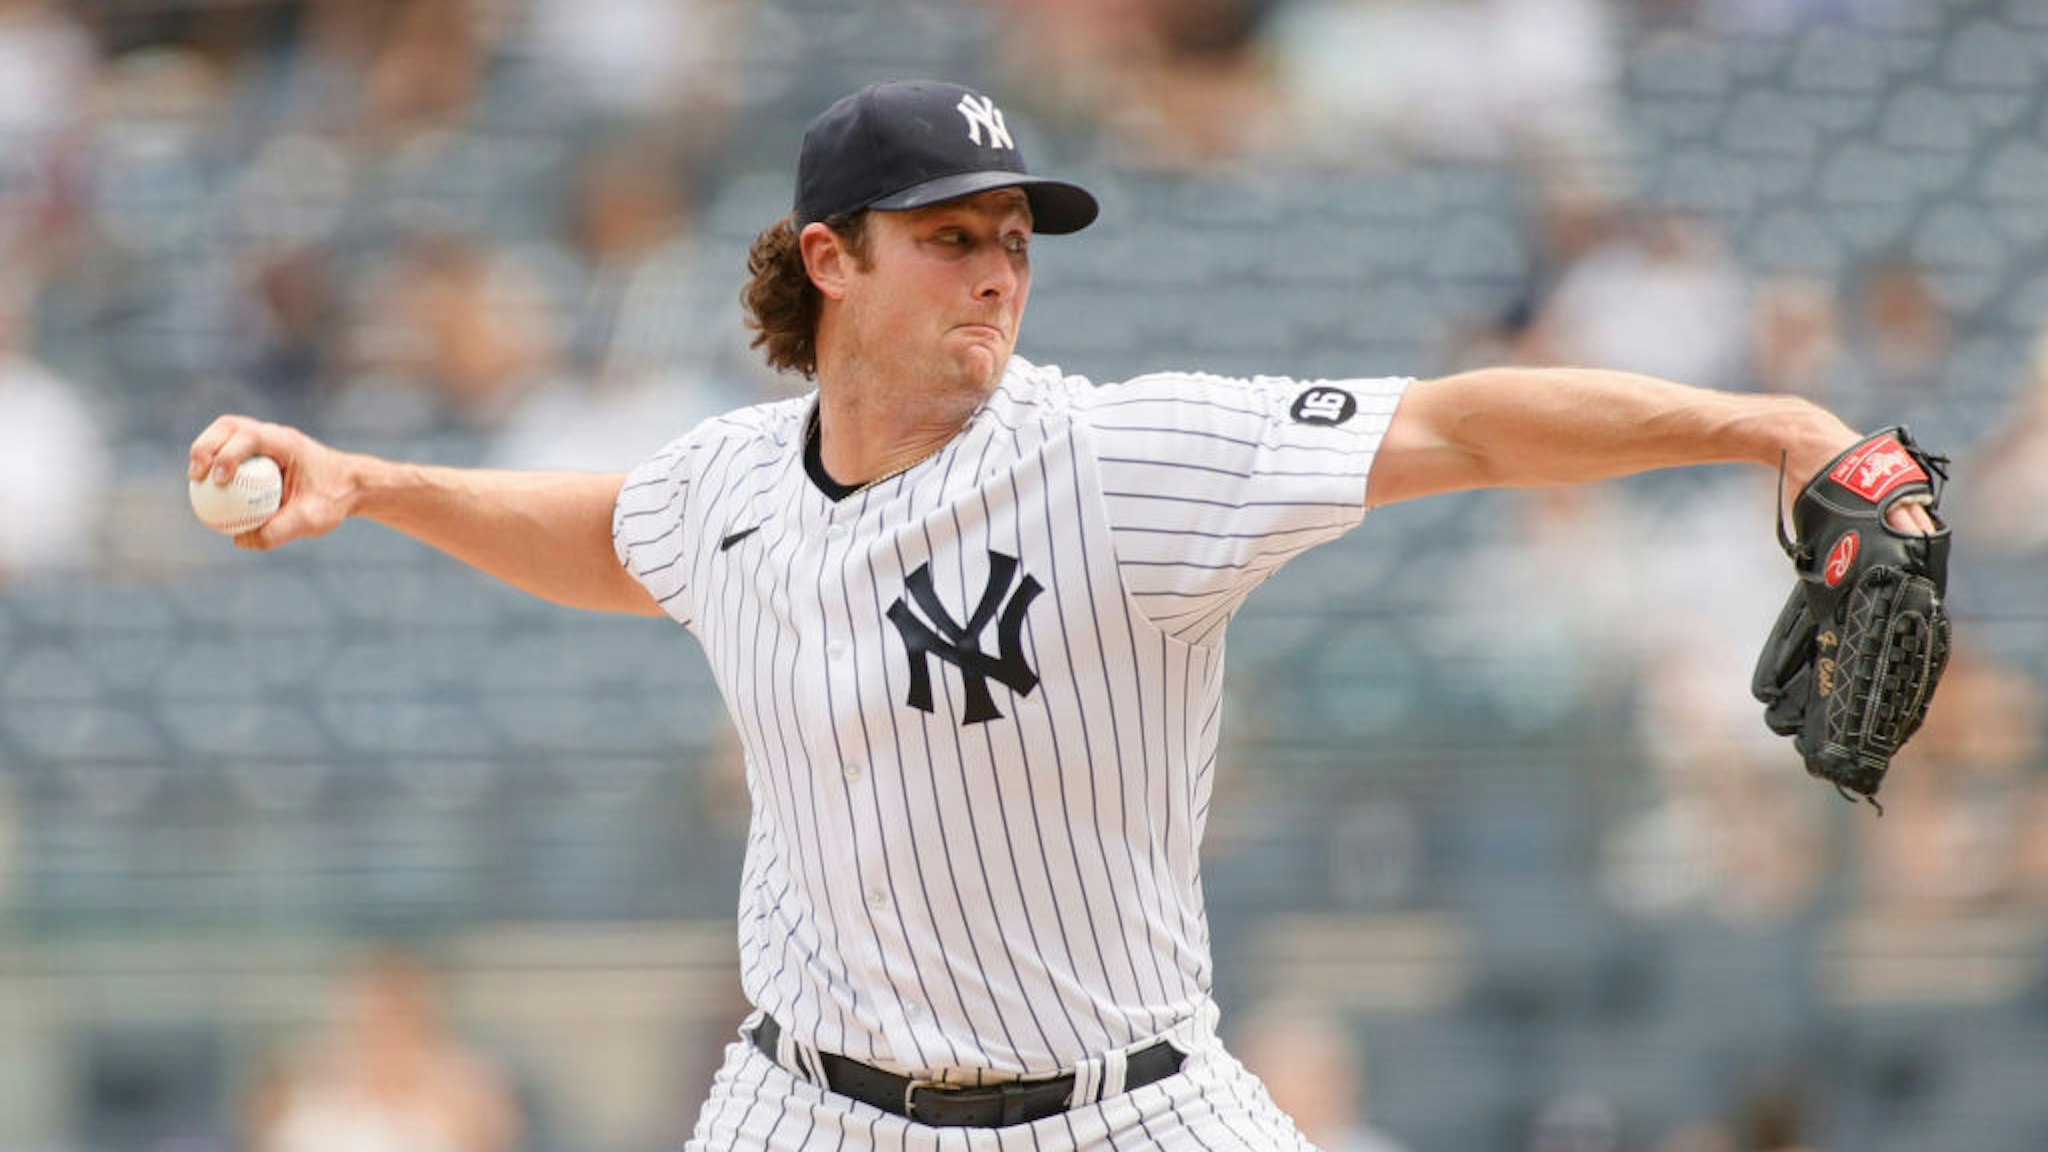 NEW YORK, NEW YORK - MAY 22: Gerrit Cole #45 of the New York Yankees pitches during the seventh inning against the Chicago White Sox at Yankee Stadium on May 22, 2021 in the Bronx borough of New York City. (Photo by Sarah Stier/Getty Images)